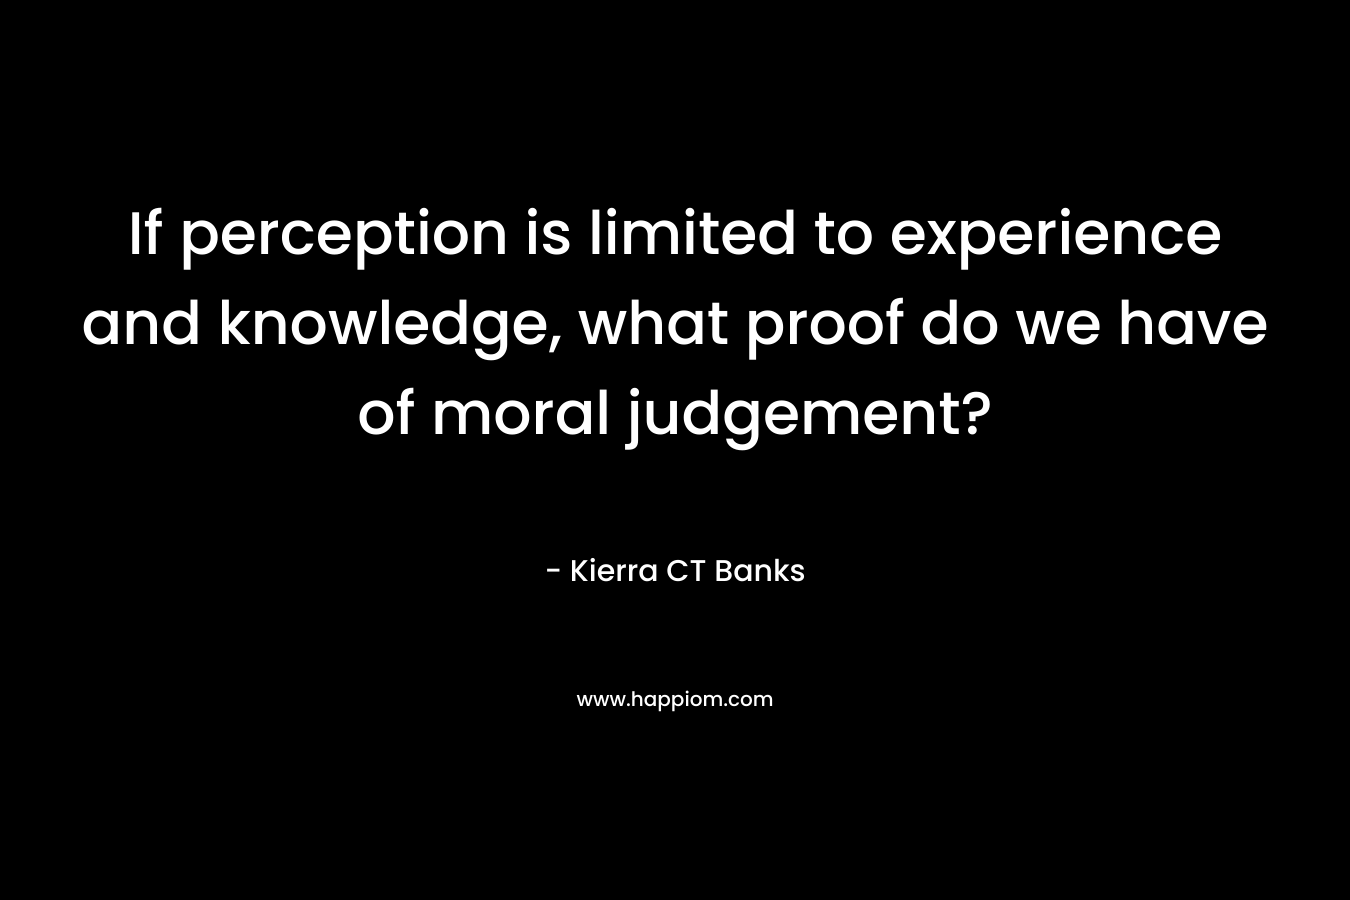 If perception is limited to experience and knowledge, what proof do we have of moral judgement?